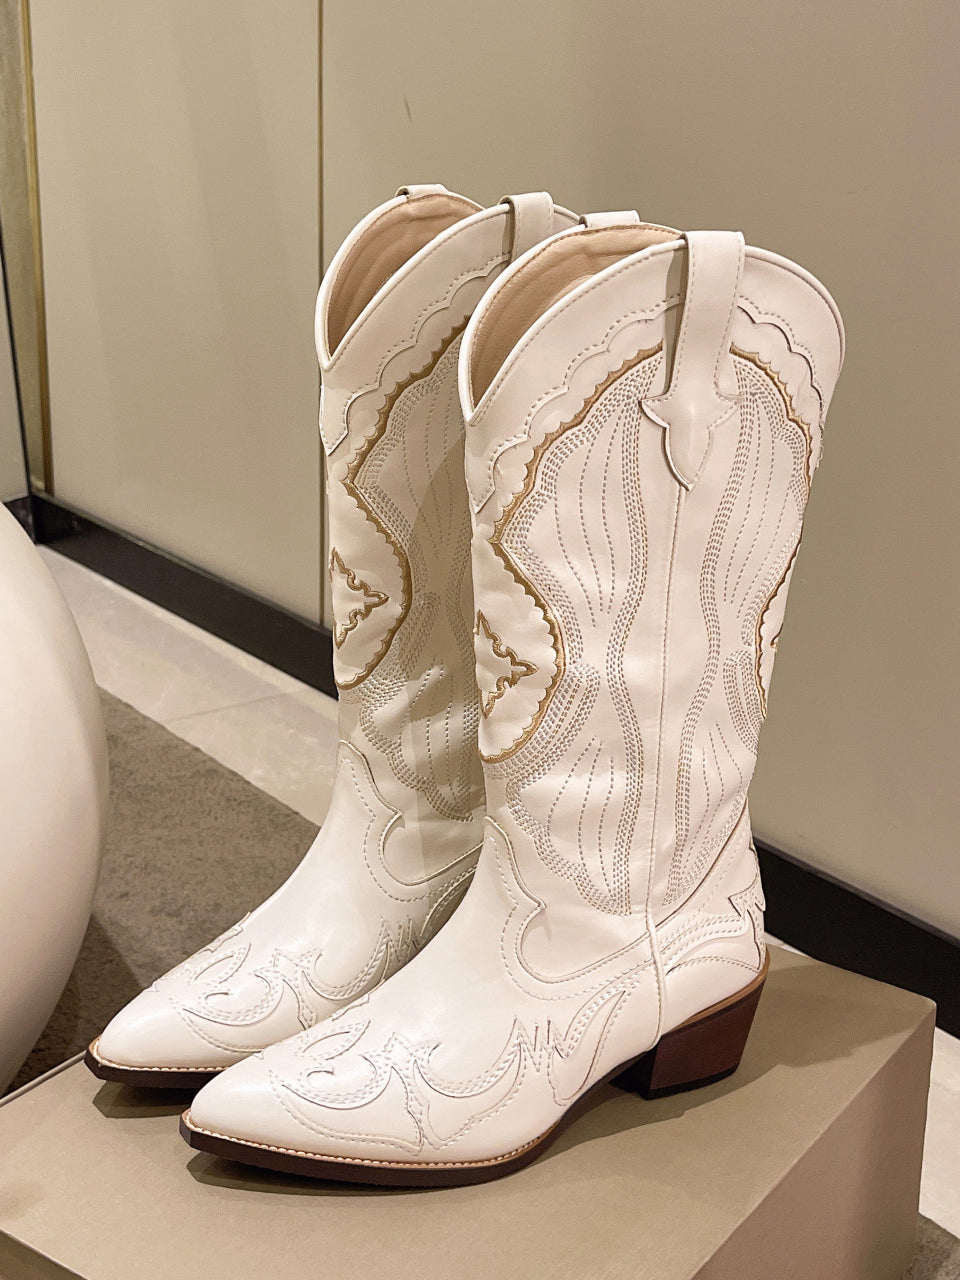 Embroidered Cowboy Mid-Calf Boots